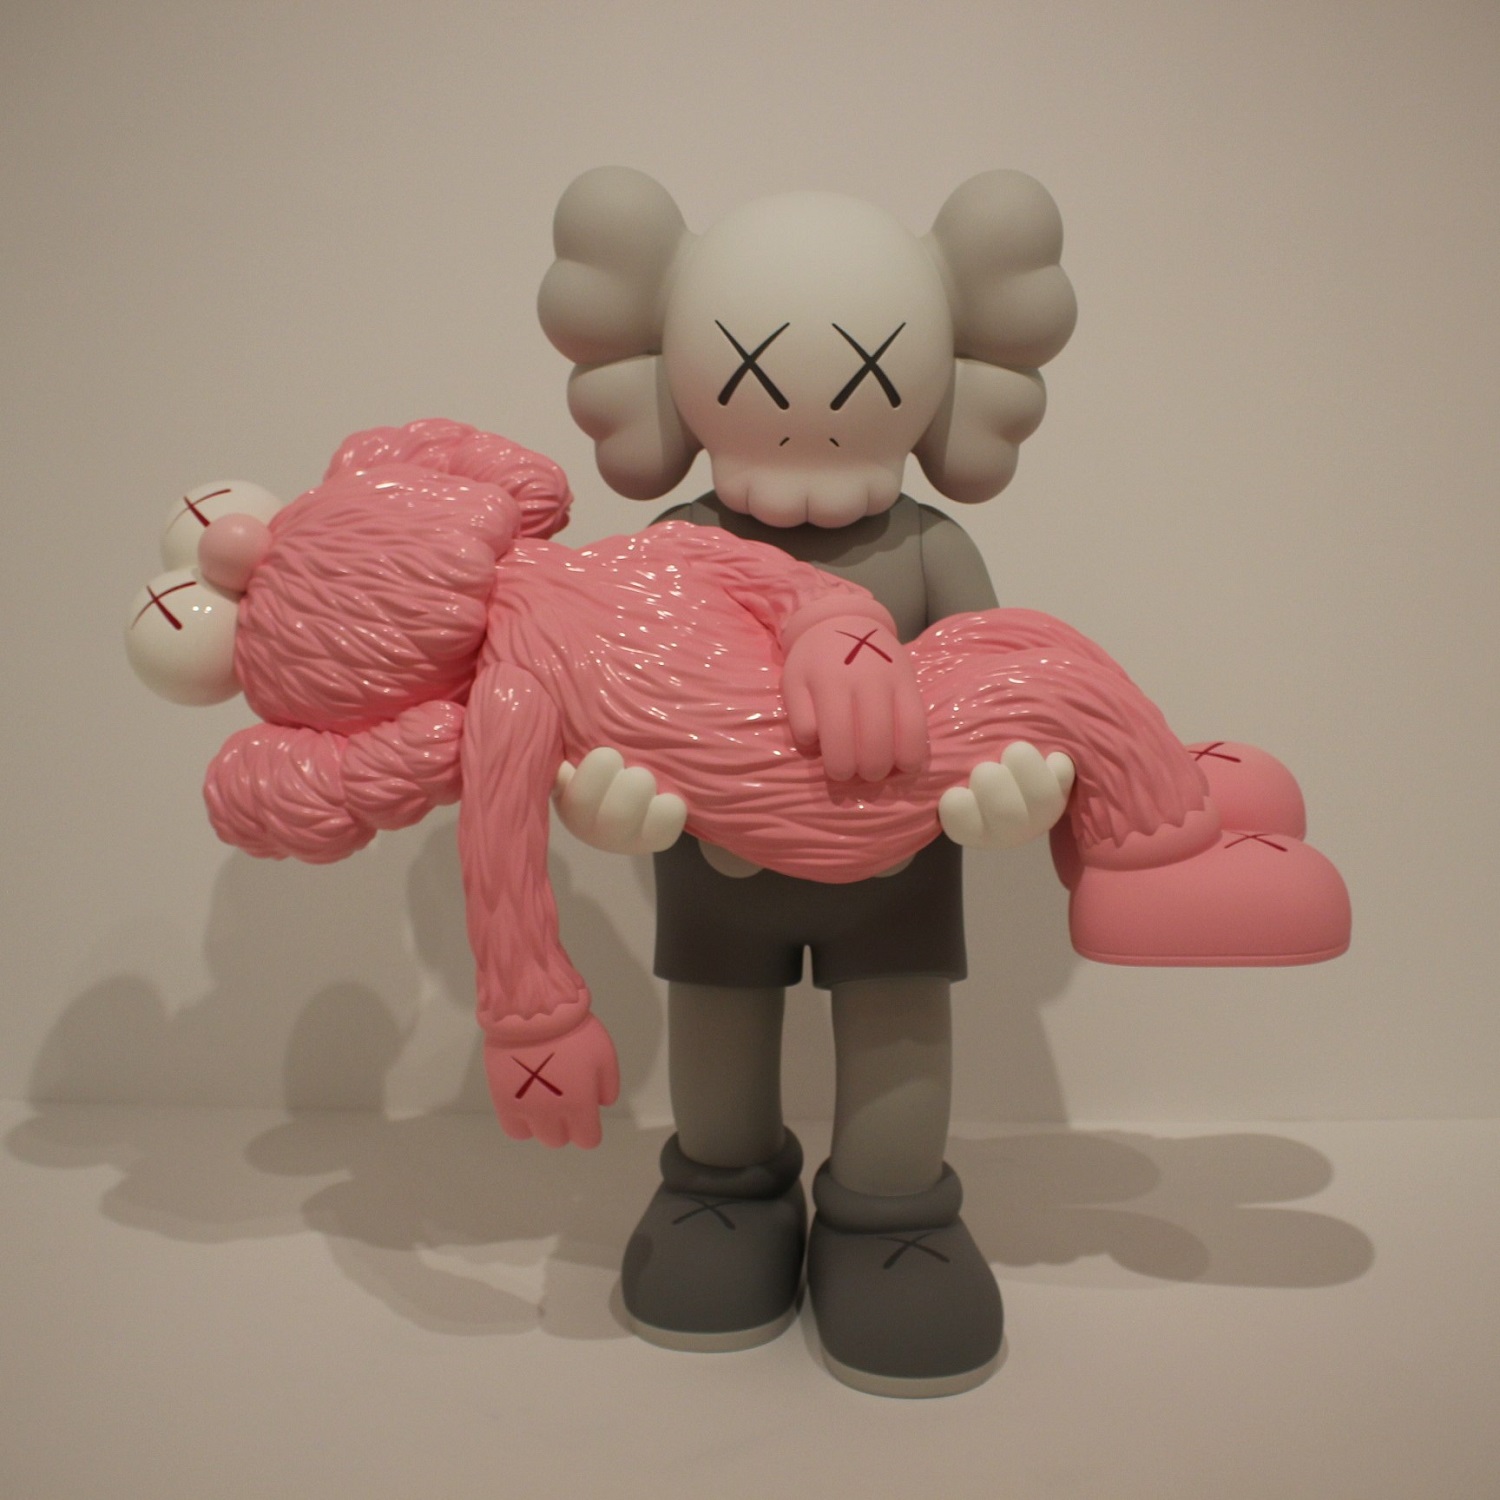 Right For The Moment KAWS First Solo Museum Show At Brooklyn Museum